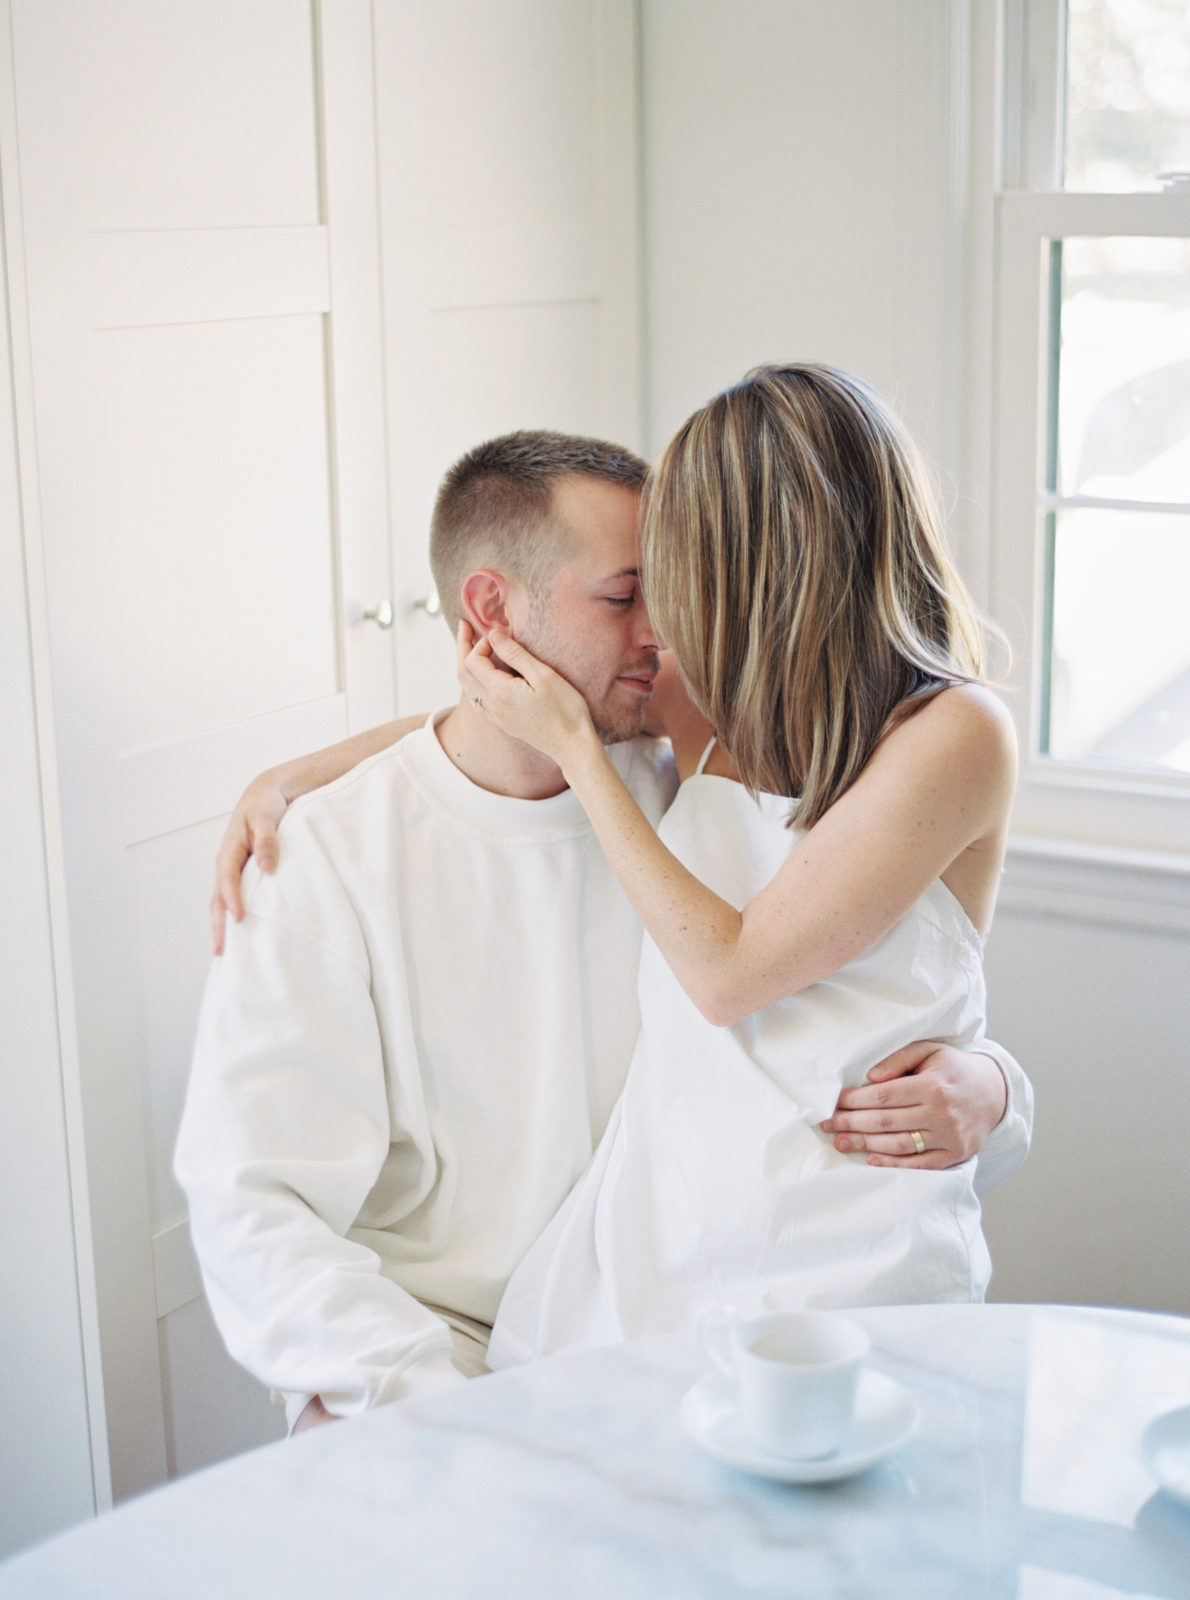 Lifestyle in-home session featuring minimal clothing and design. Couple at table snuggling.